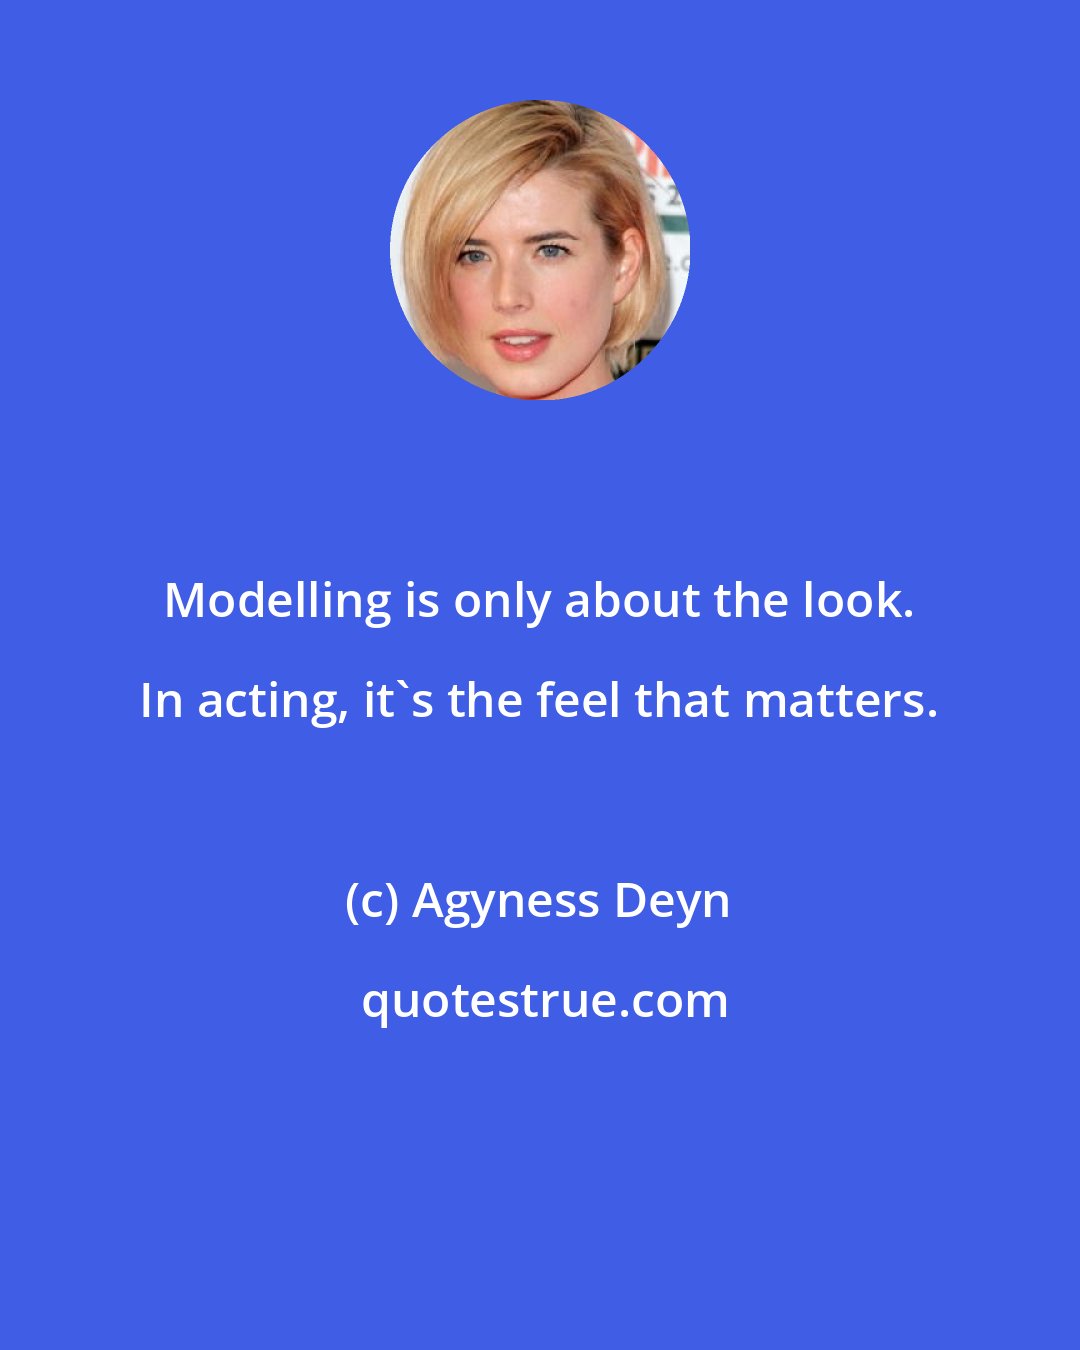 Agyness Deyn: Modelling is only about the look. In acting, it's the feel that matters.